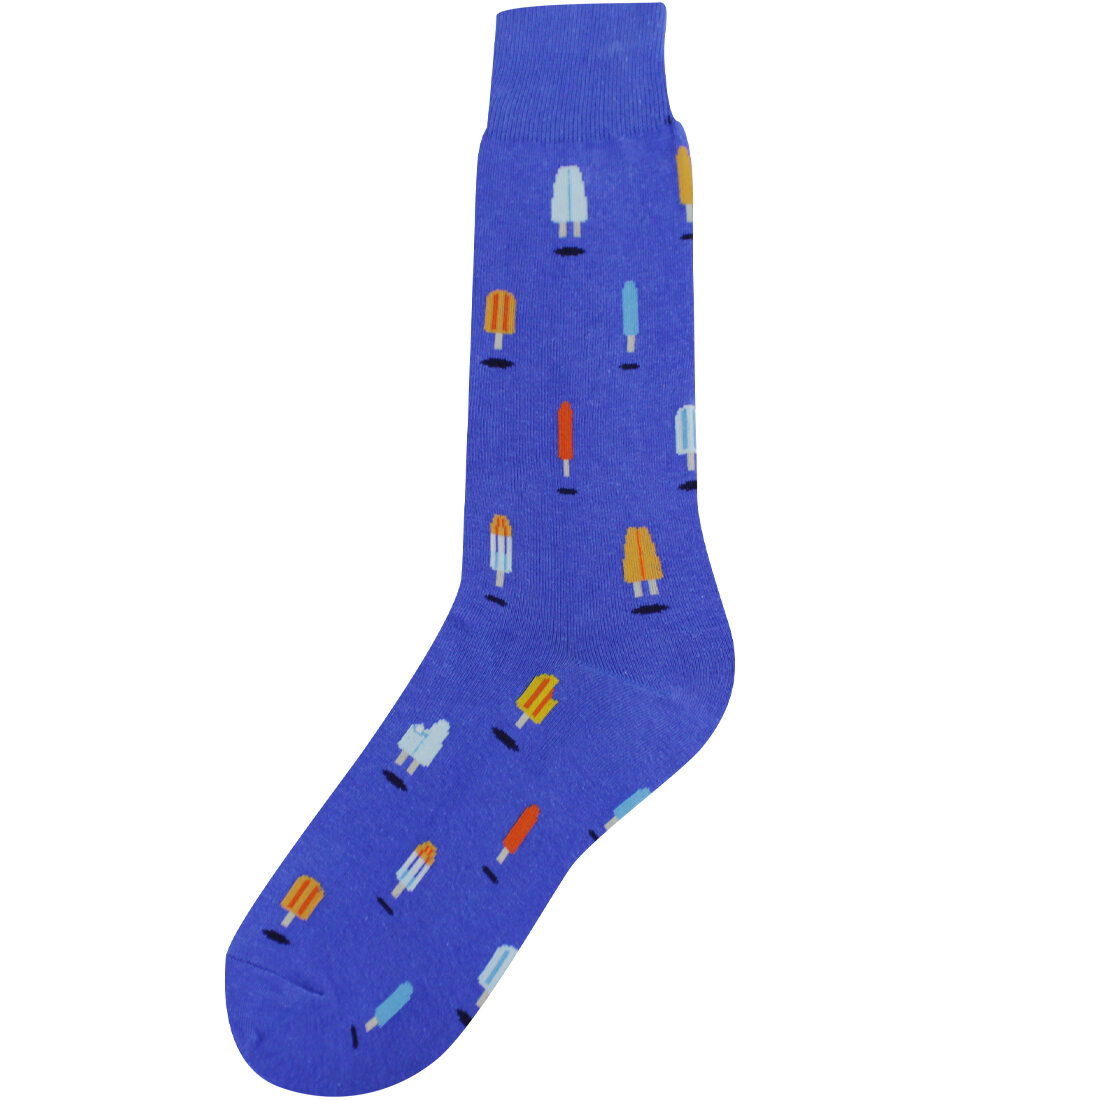 Men's funny socks showcase a rich blue background with bright